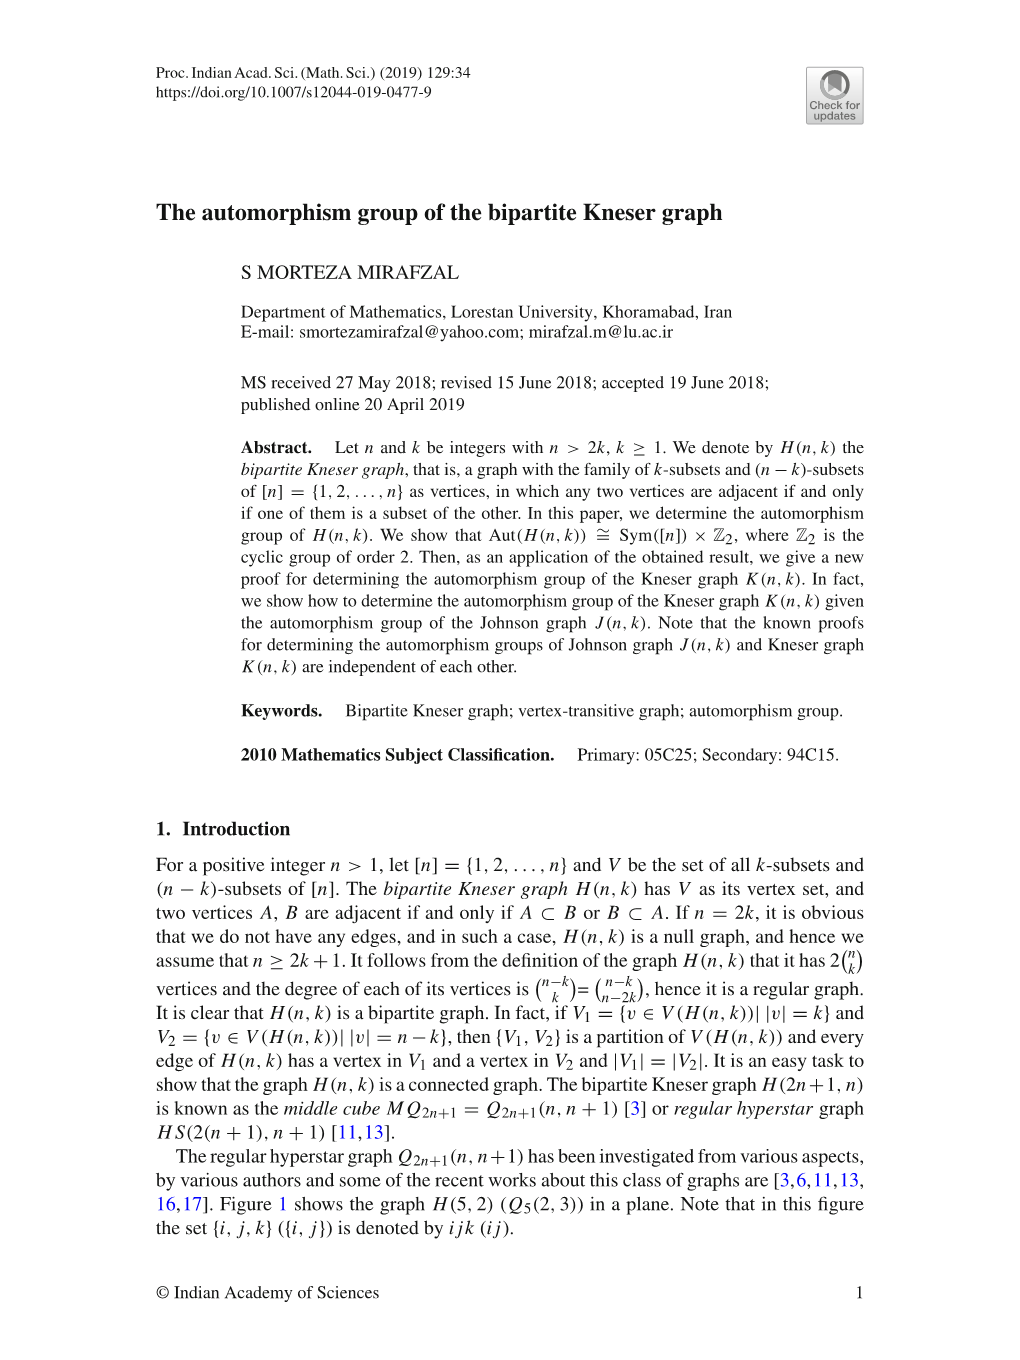 The Automorphism Group of the Bipartite Kneser Graph